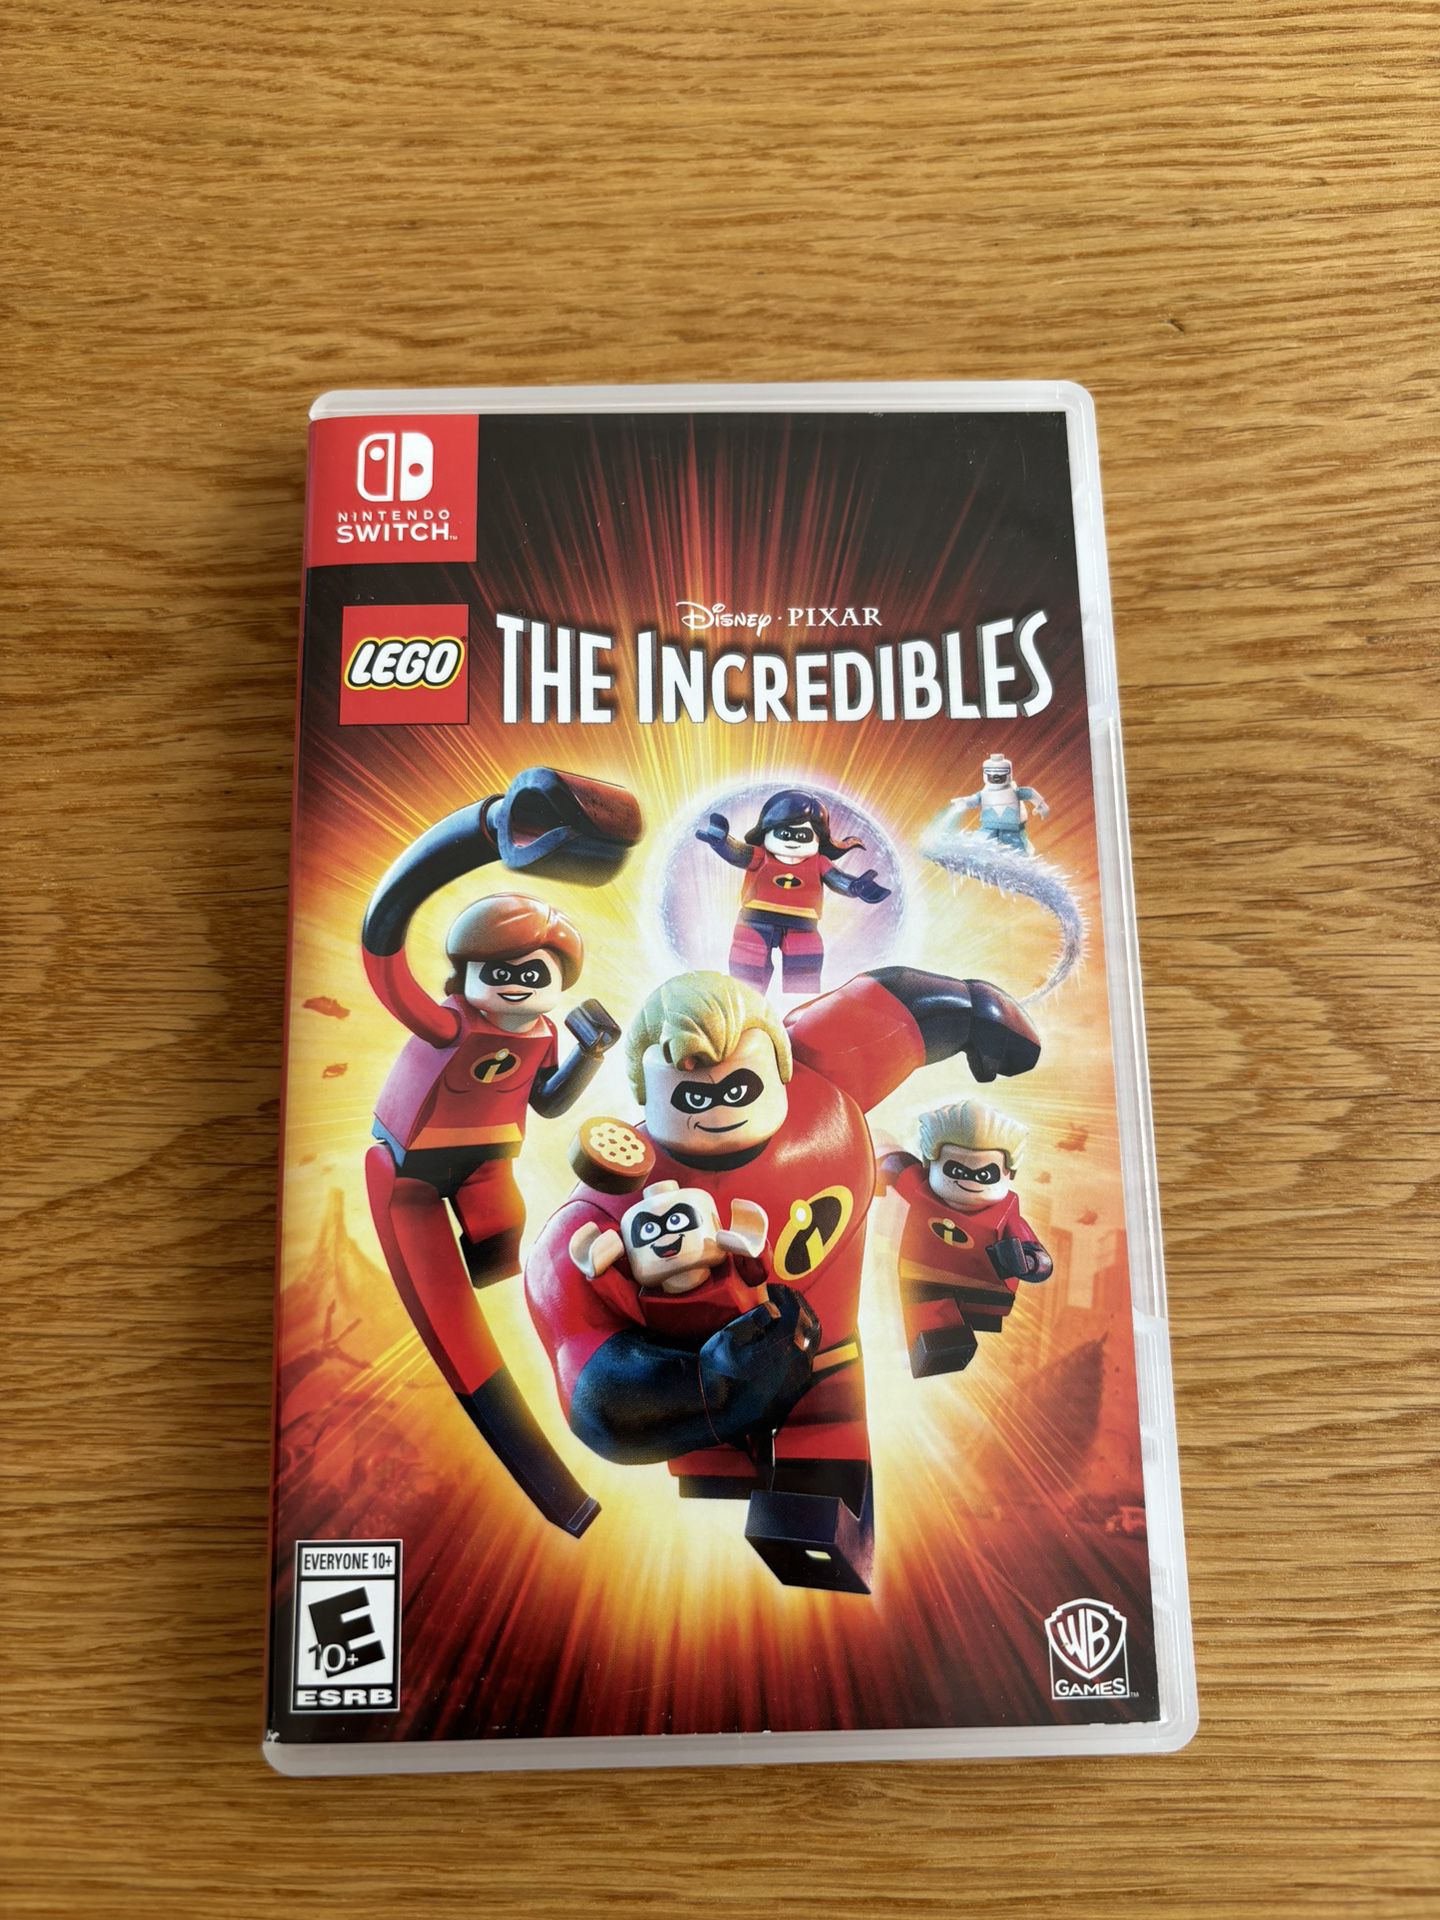 The Incredible Nintendo Switch Game